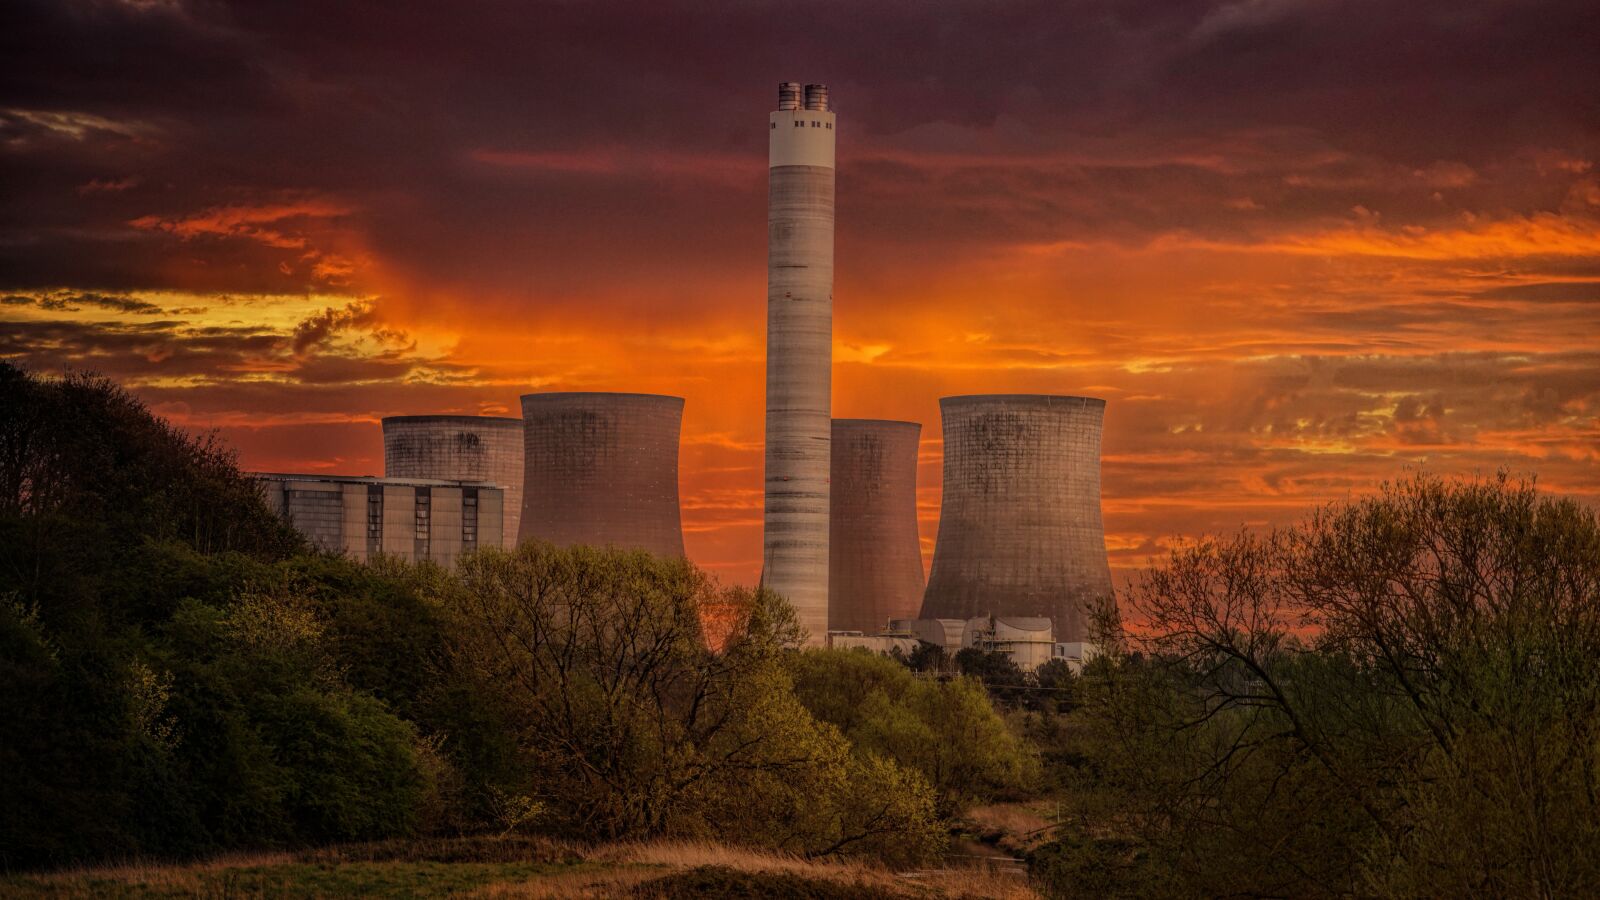 Sony a7 II sample photo. Cooling towers, industry, evening photography